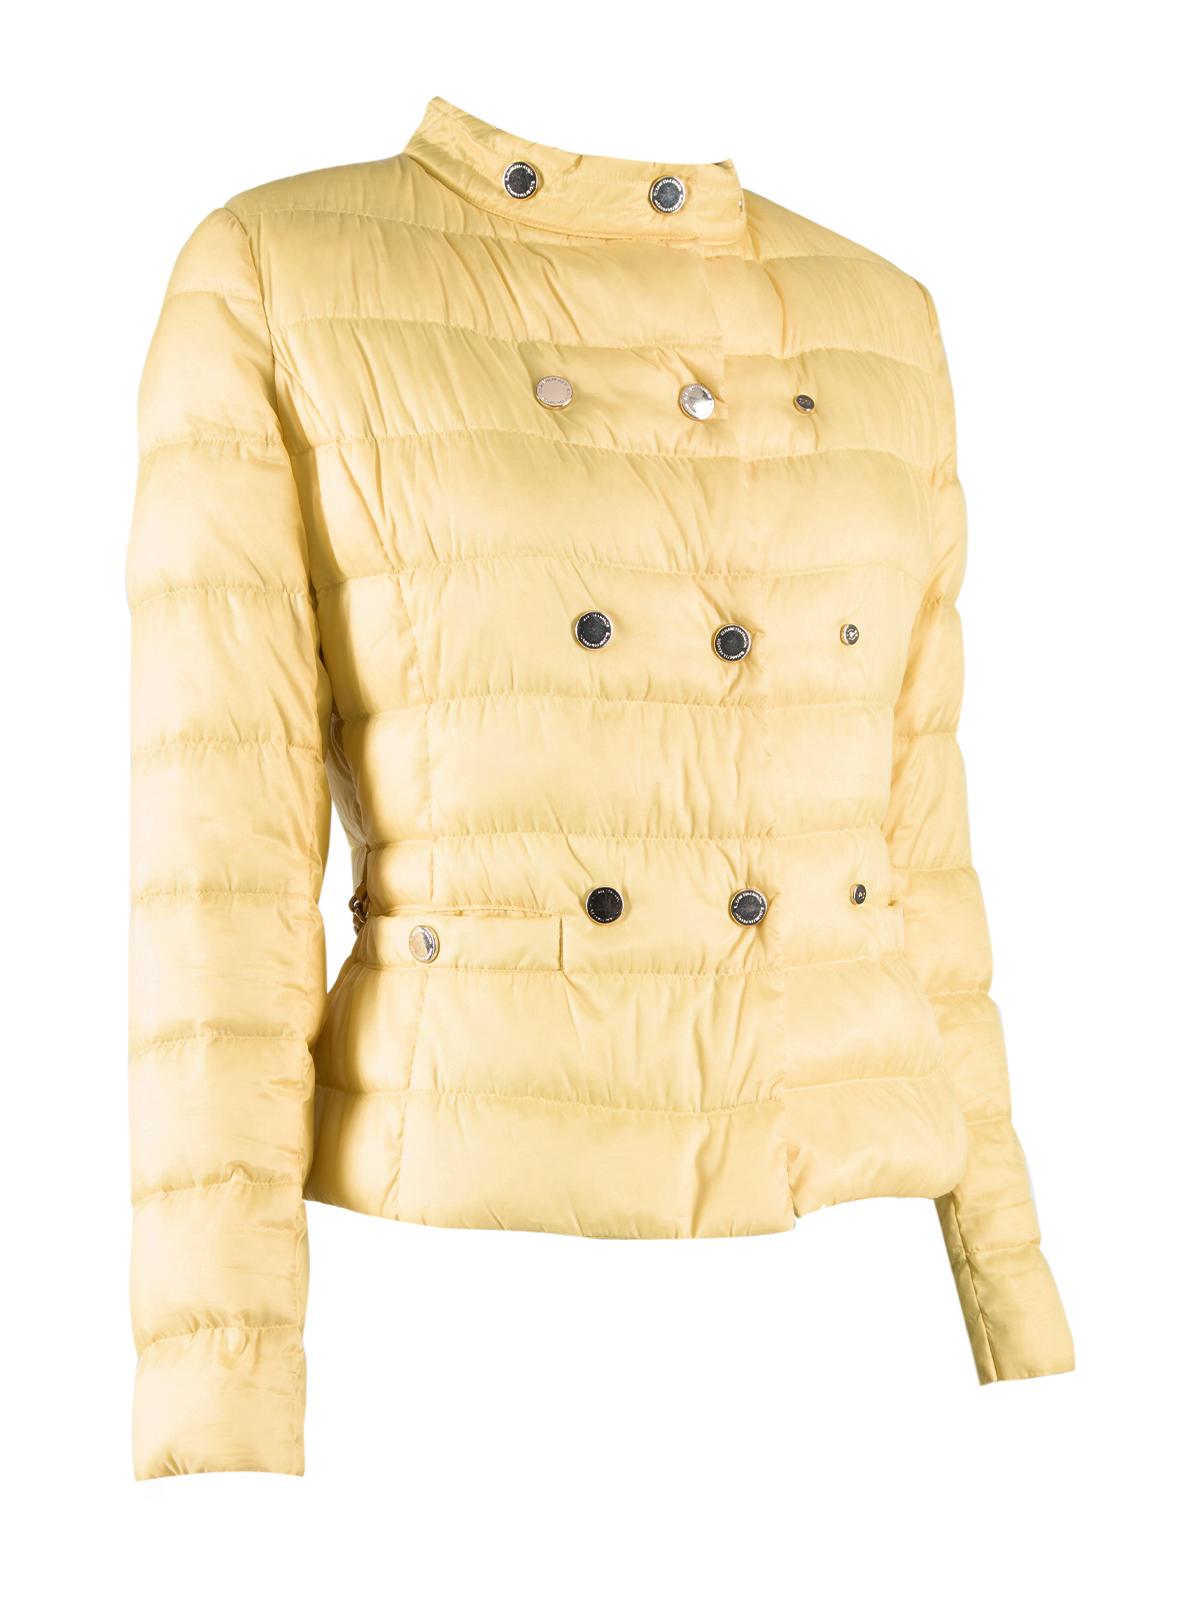 CONDITION is Very good. Minimal wear to jacket is evident. Minimal wear to buttons and Chain belt pendant on this used Elisabetta Franchi designer resale item. Details Yellow Polyester and polyamide Puffer jacket Form fitting Long sleeve Round neck